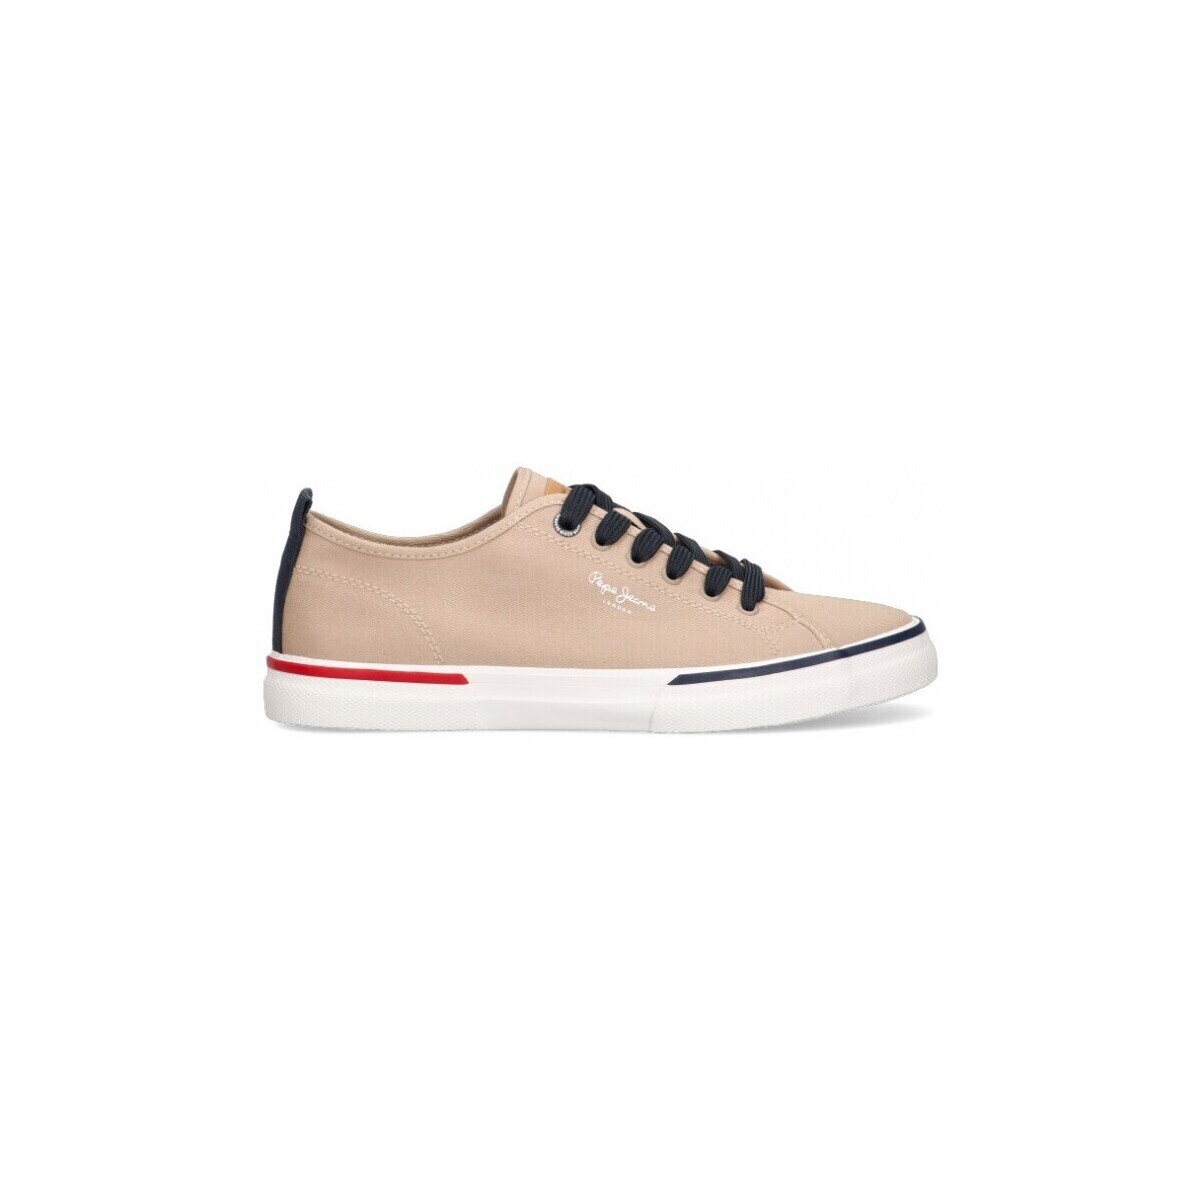 Pepe jeans  Sneakers Pepe jeans 74313